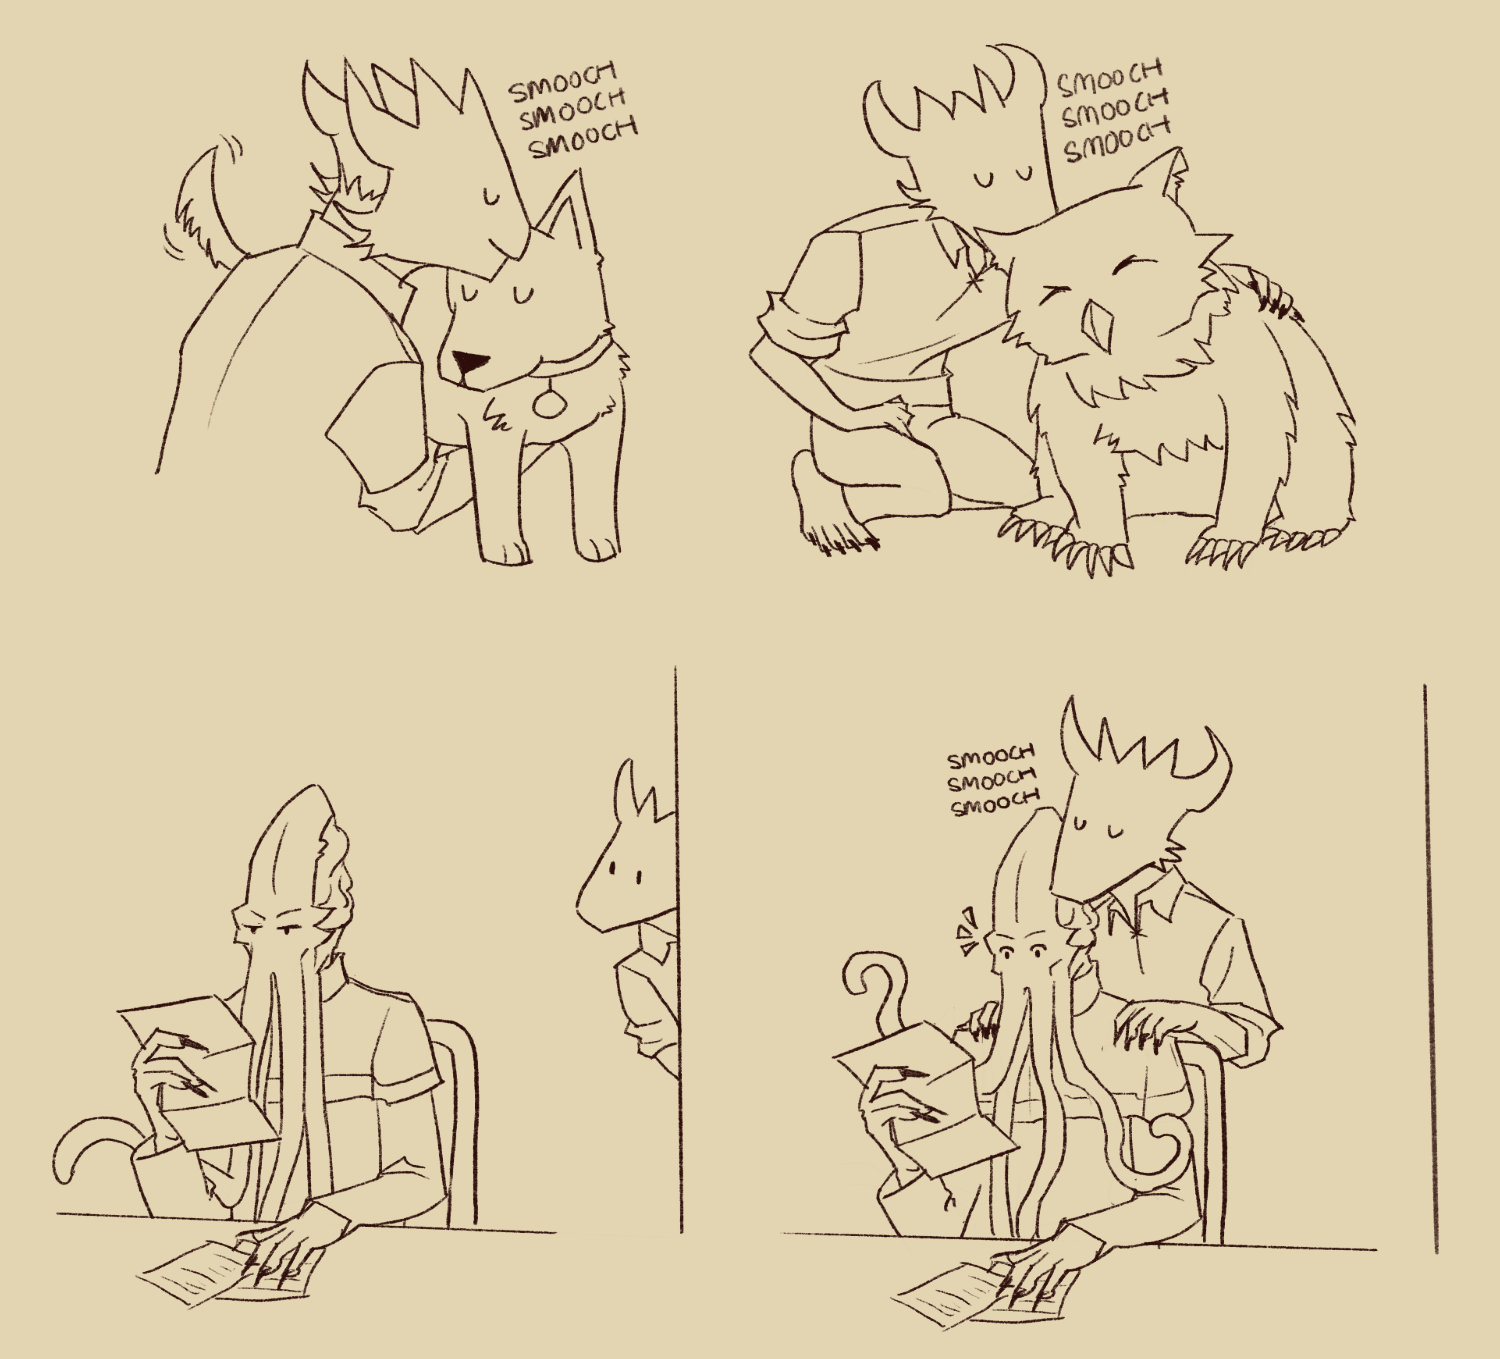 A four panel comic. The first panel has Daamric (a Dragonborn) kissing the top of Scratch's head. In the second panel, Daamric kisses the top of the owlbear cub's head. The third panel shows the Emperor sitting down reading a letter, while Daamric is in the back looking in. The fourth panel shows Daamric kissing the top of the Emperor's head and the latter is surprised by the sudden kisses.